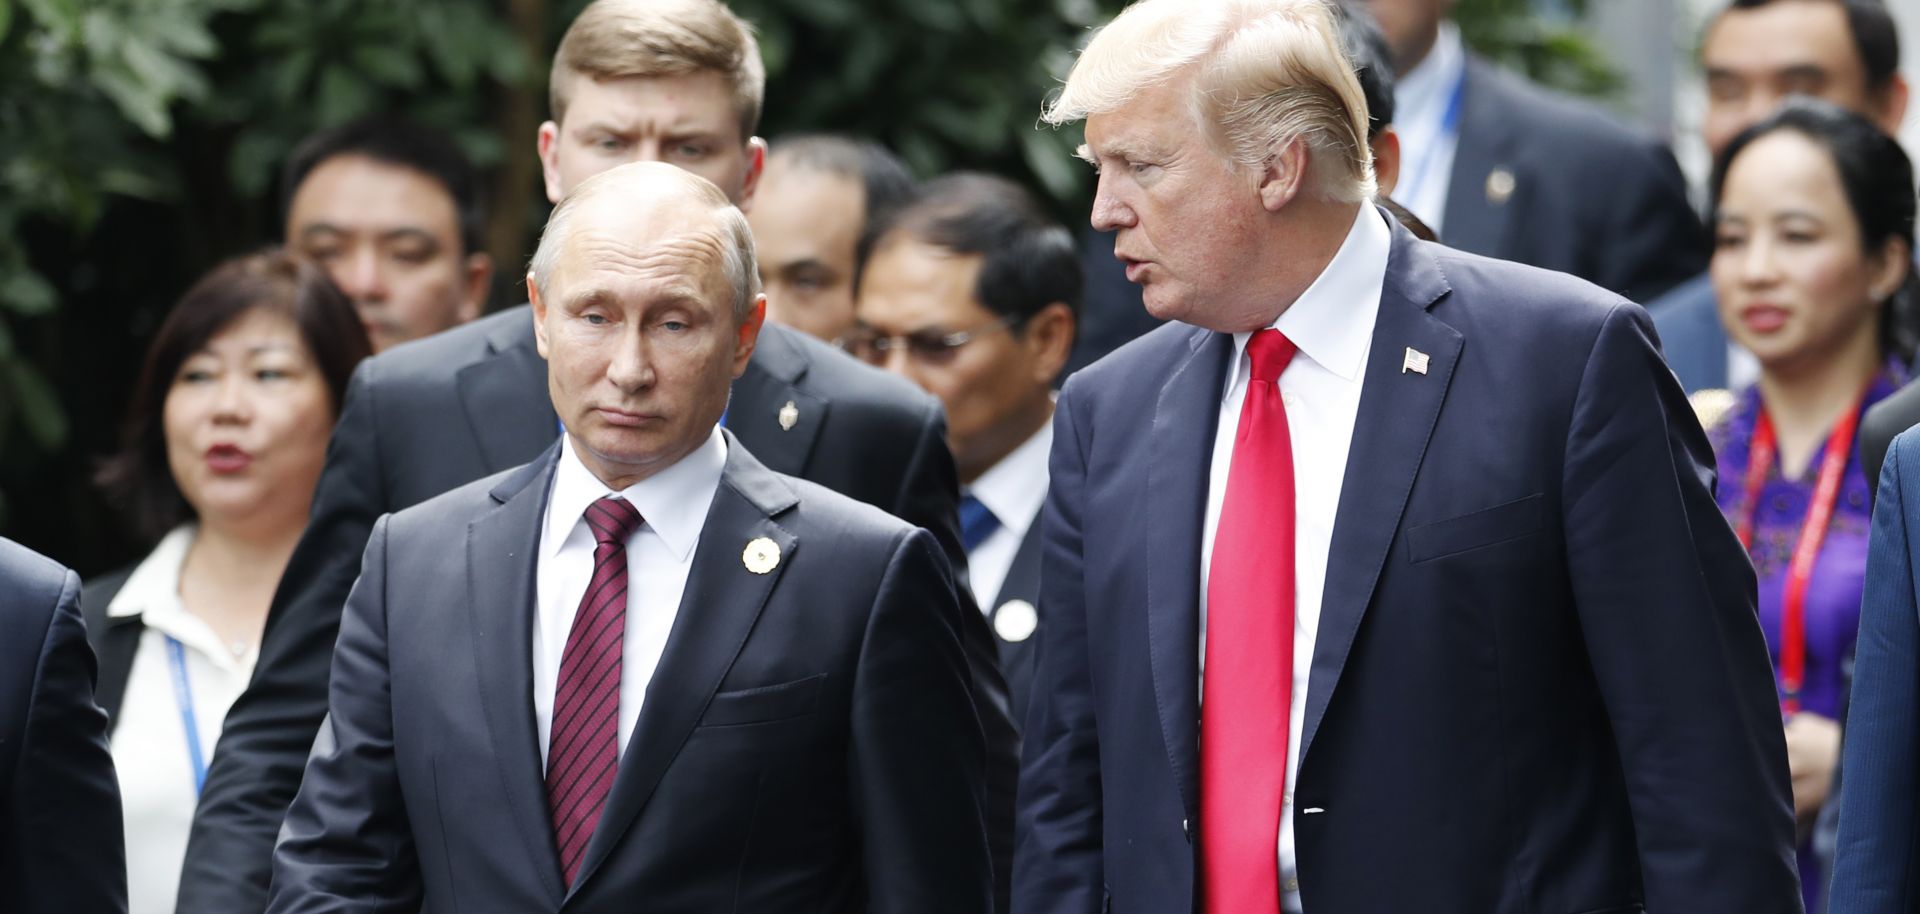 After leaving a NATO summit, U.S. President Donald Trump (right) is scheduled to meet with Russian President Vladimir Putin in Helsinki.